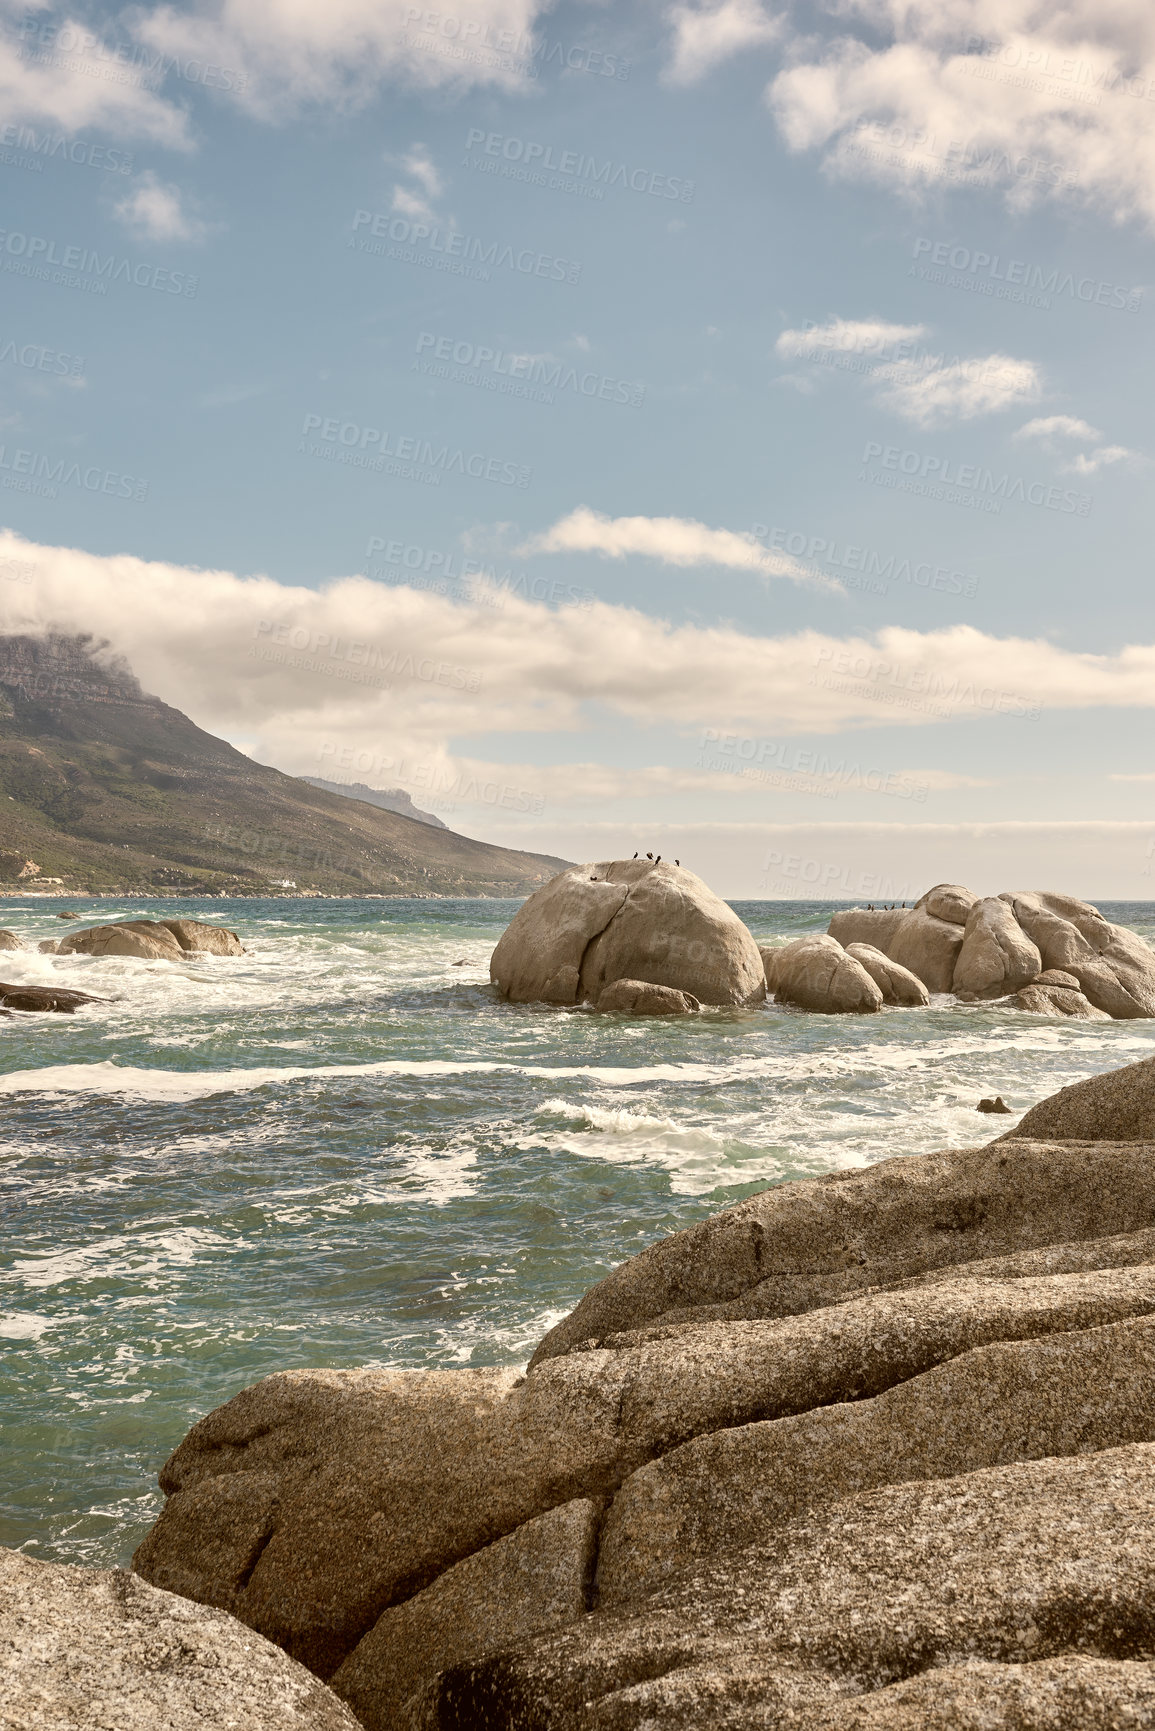 Buy stock photo Rocks in the ocean under a blue cloudy sky with copy space. Scenic landscape of beach waves splashing against boulders or big stones in the sea at a popular summer location in Cape Town, South Africa